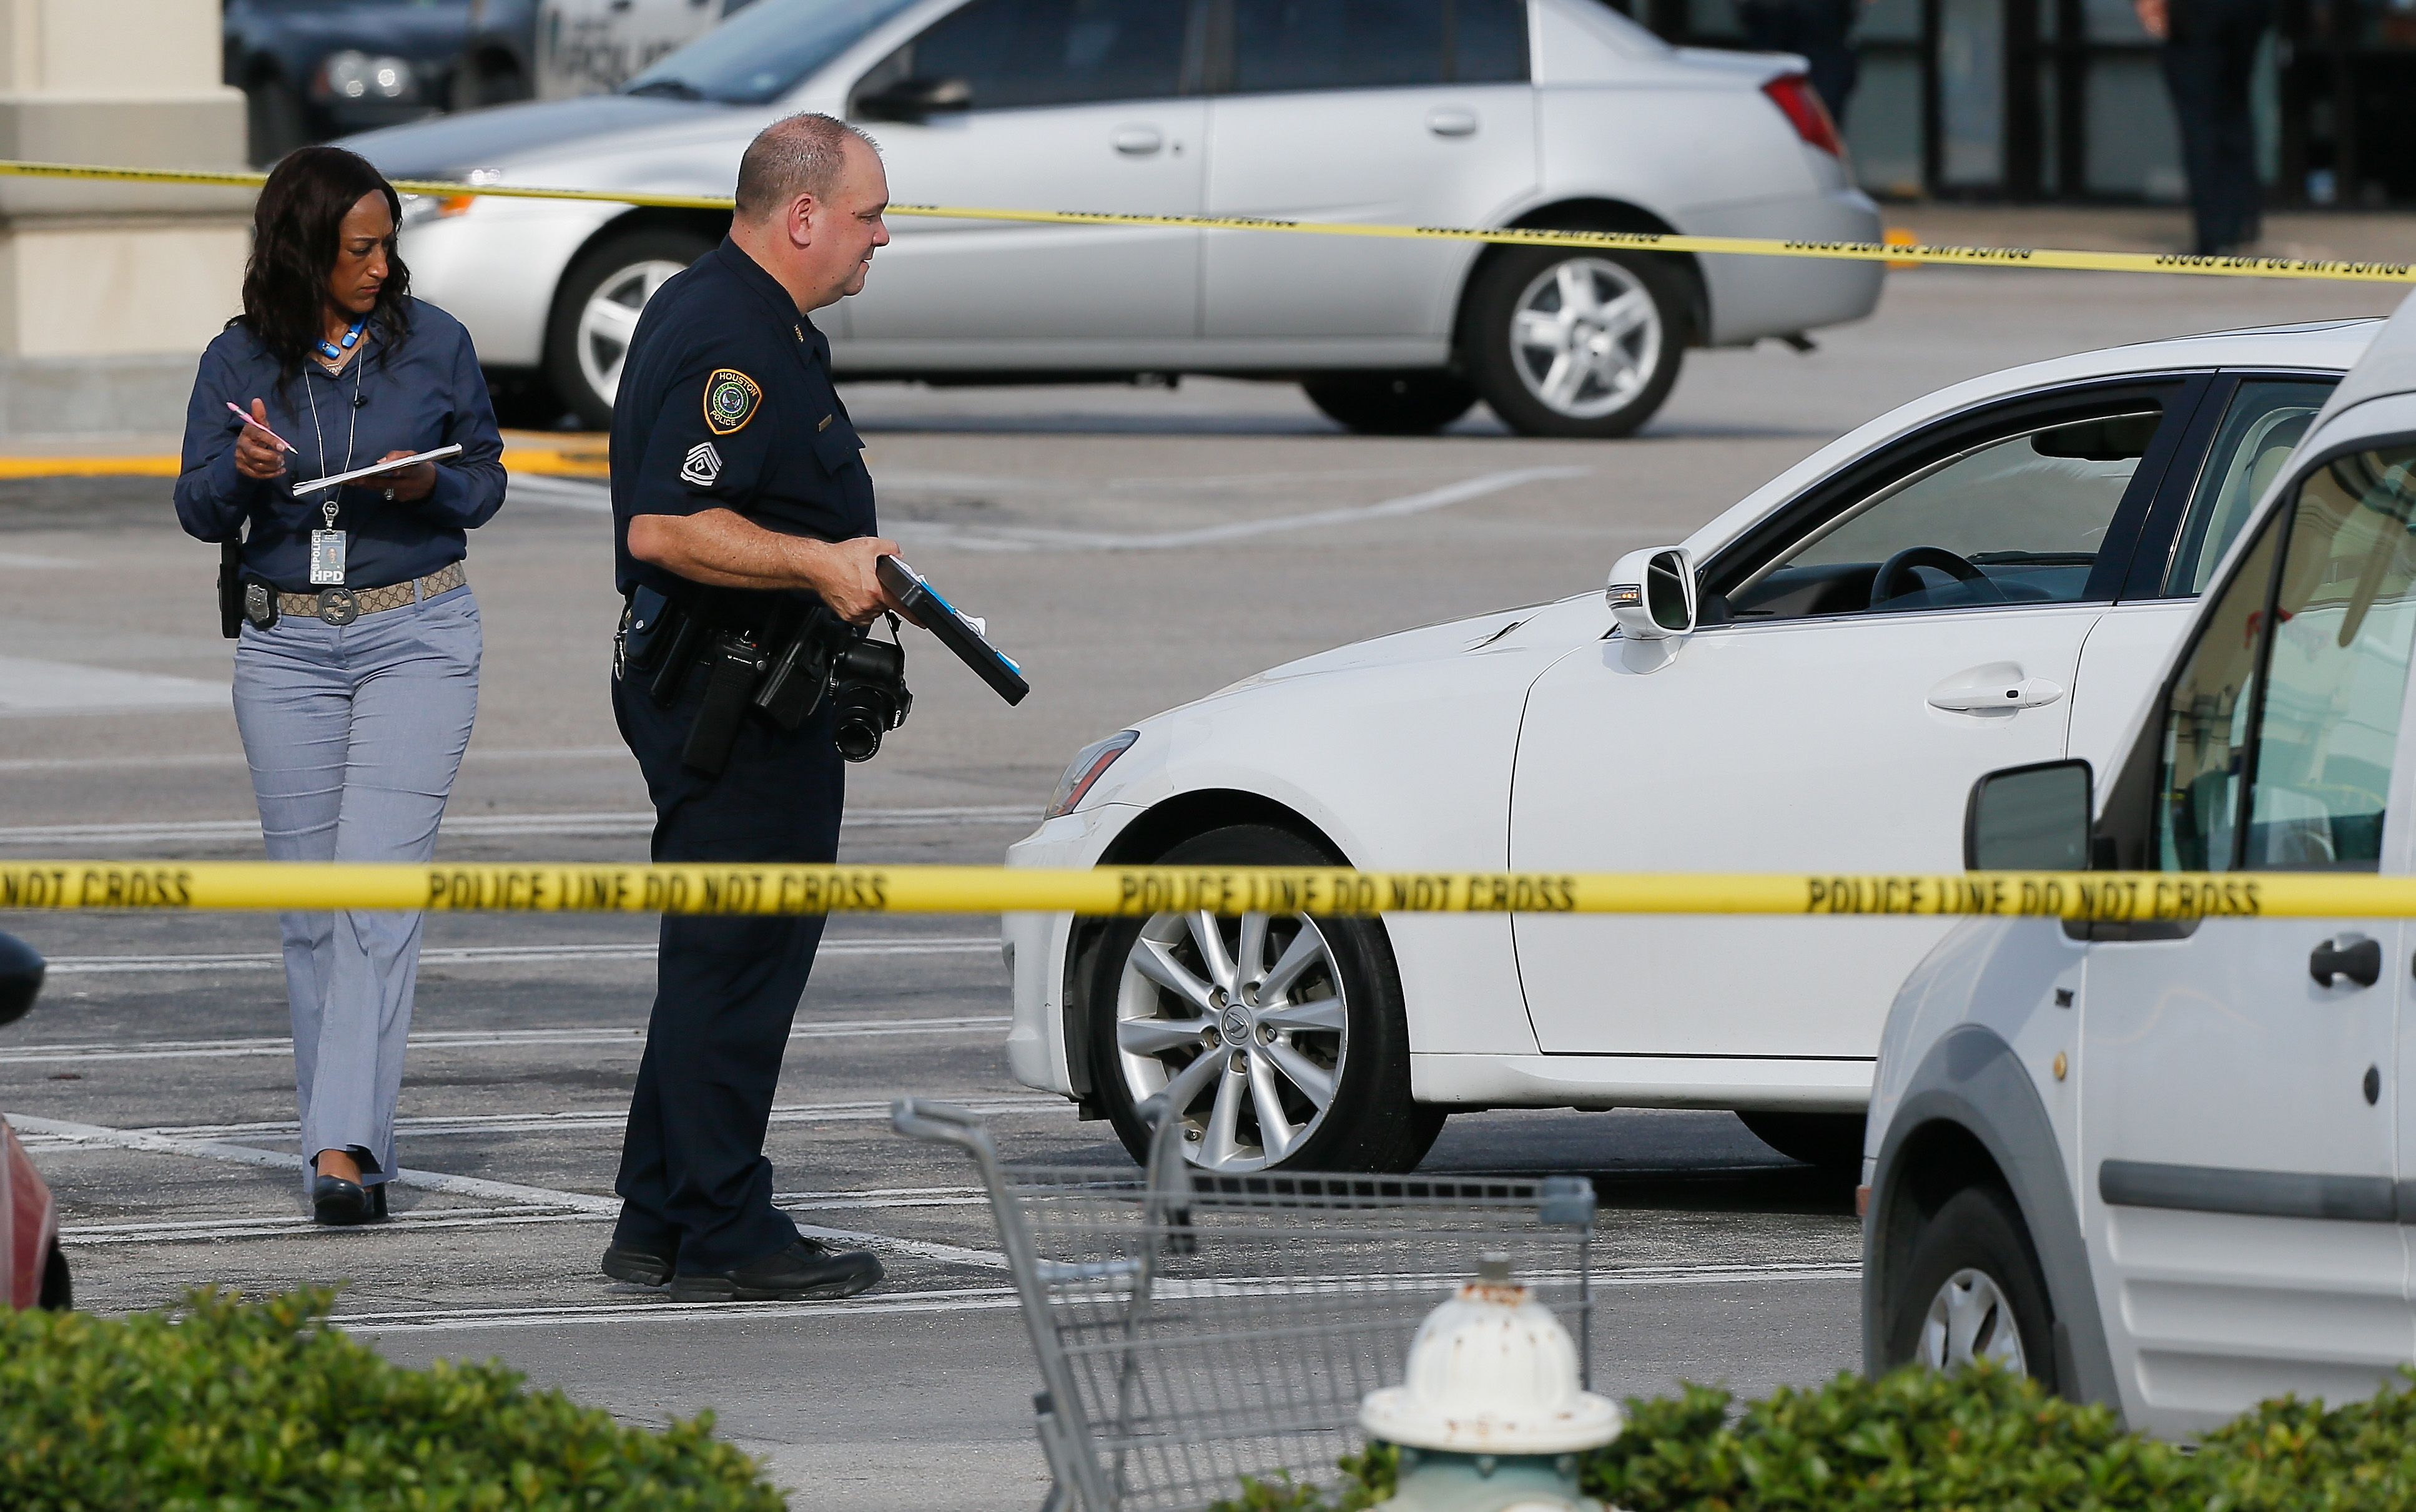 HOUSTON, TX - SEPTEMBER 26: Houston Police investigators photograph a vehicle that received gunshot damage during a scene where nine people were wounded in a strip mall shooting on September 26, 2016 in Houston, Texas. The gunman was shot and killed by police officers. Three victims have been transported to Southwest Memorial Hospital, one has been taken to Ben Taub General Hospital and two have been transported to Memorial Hermann - Texas Medical Center.   Bob Levey/Getty Images/AFP